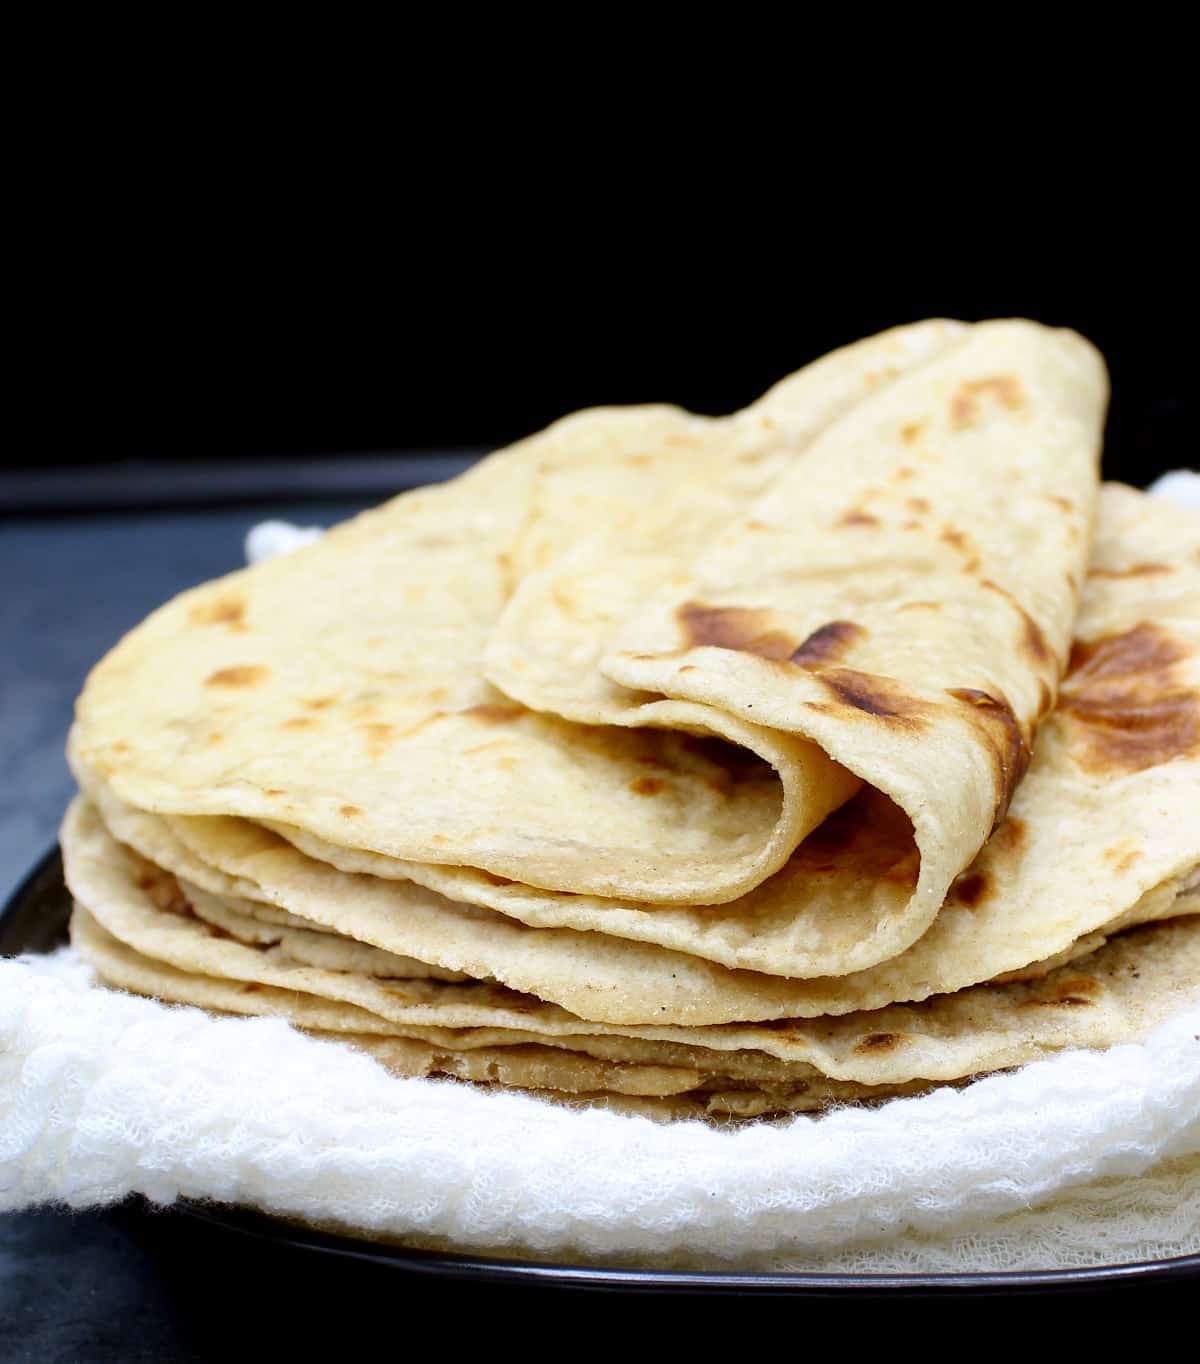 Front shot of soft sourdough rotis on a black plate wrapped in white cheesecloth.